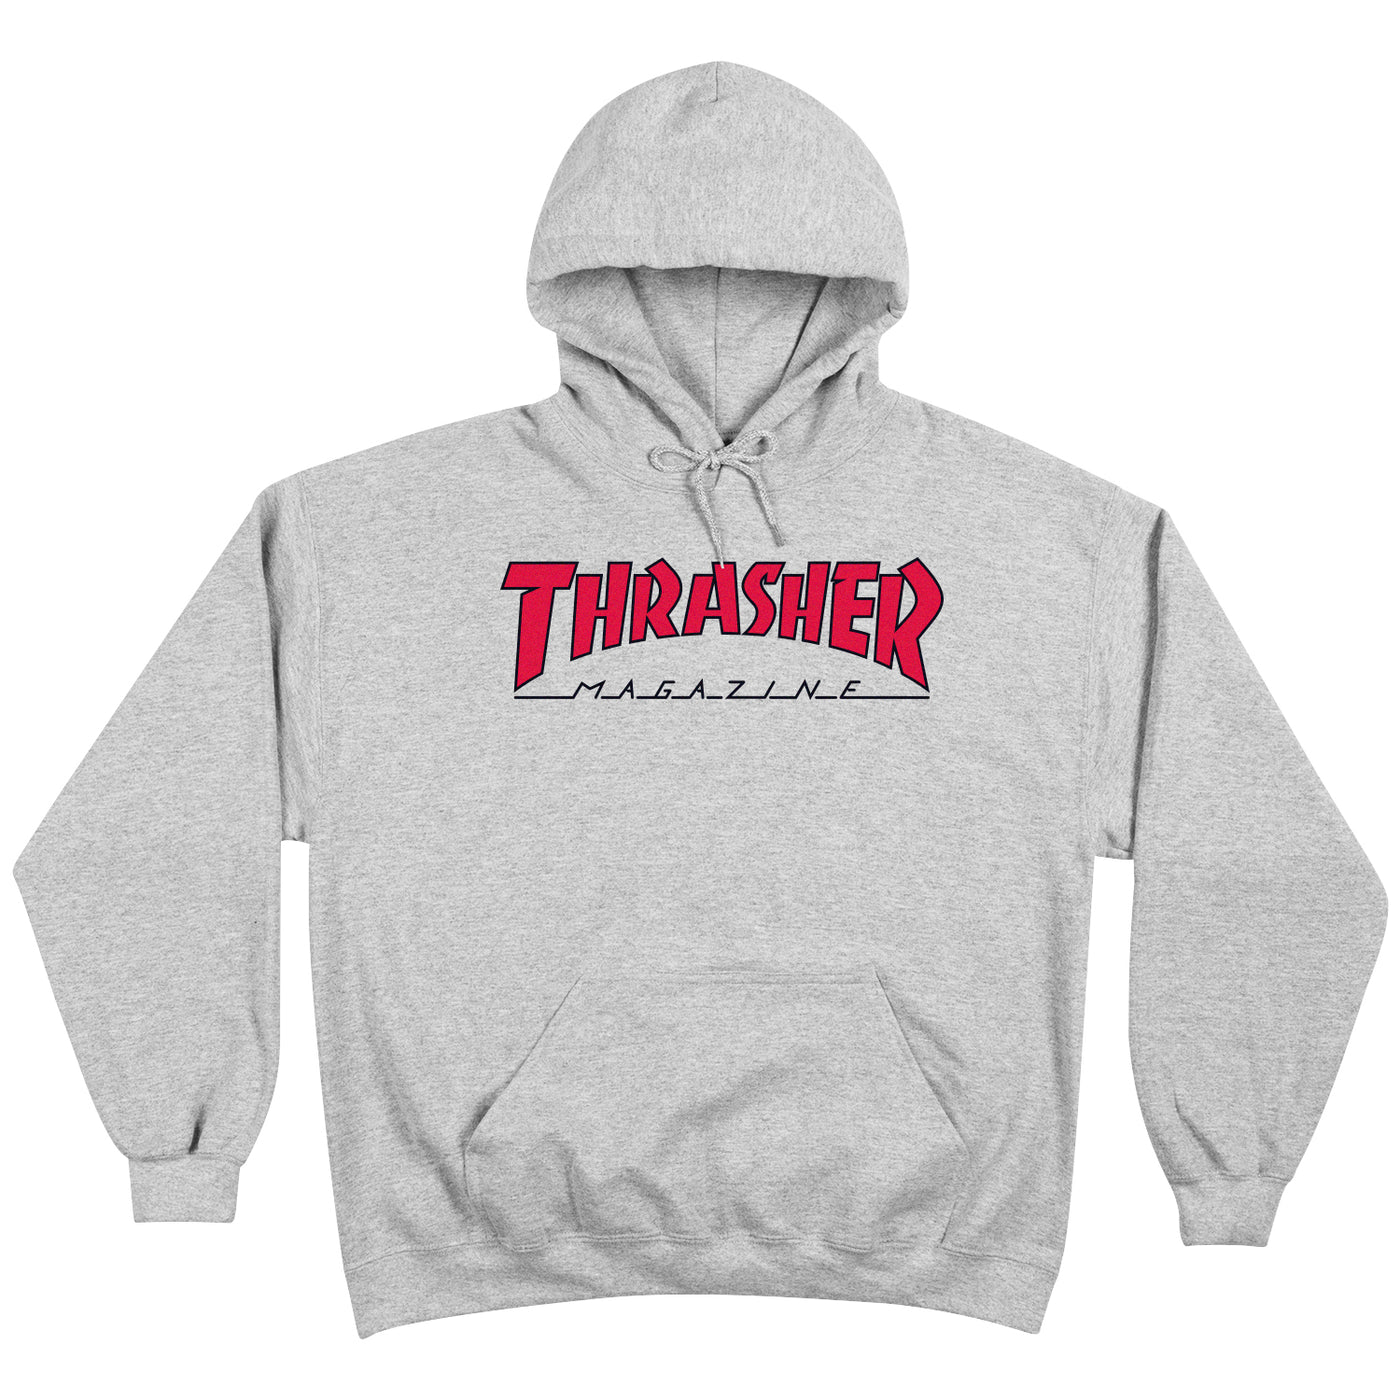 Thrasher - Poleron Canguro Outlined Logo Gray/Red